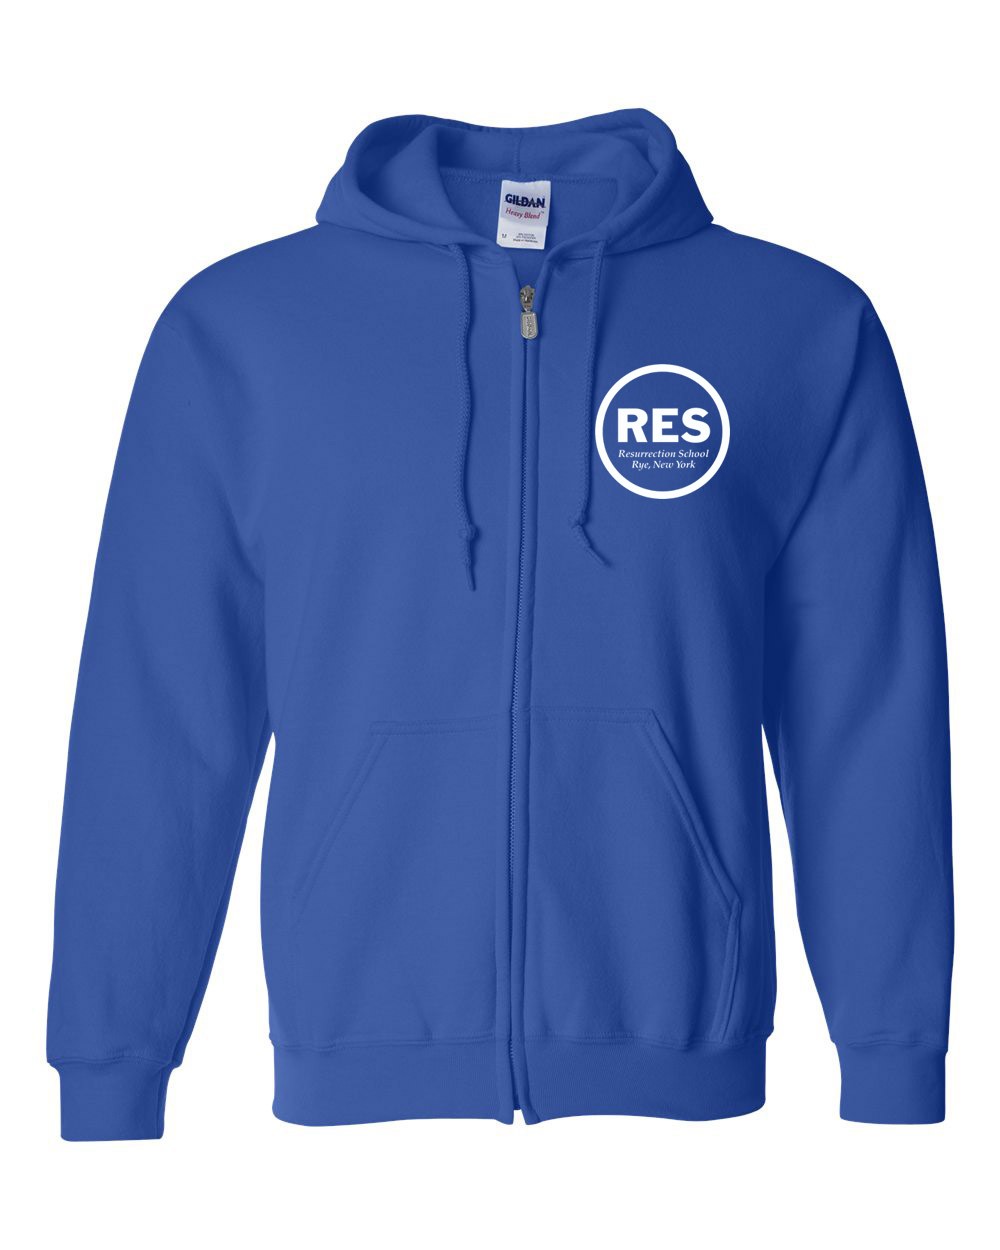 STAFF Resurrection Zip Hoodie w/ White Logo - Please Allow 2-3 Weeks for Delivery